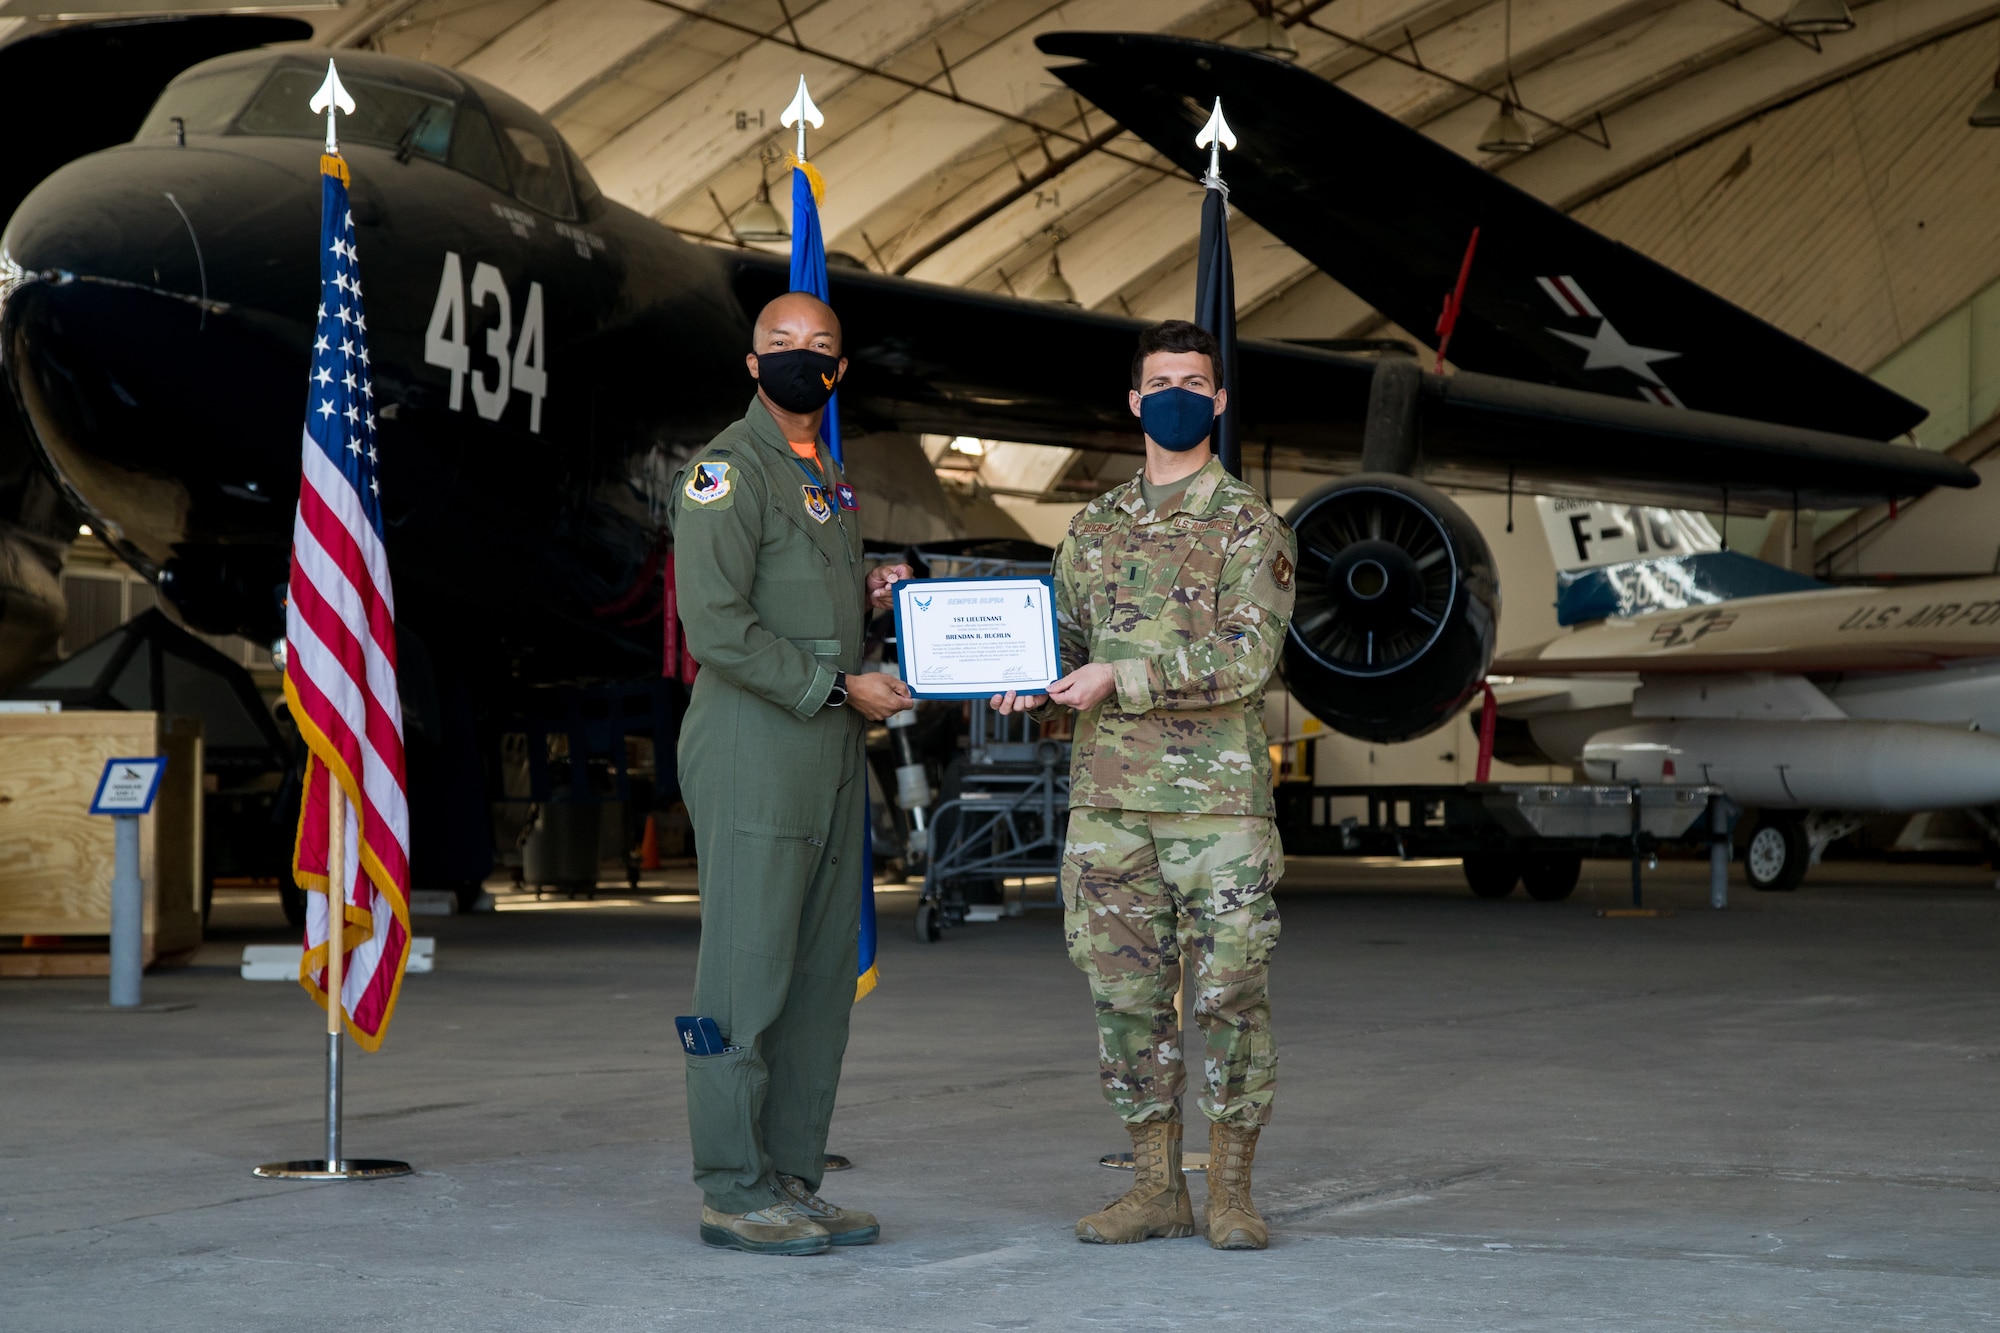 1st Lt. Brendan Ruchlin, 418th Flight Test Squadron, accepts his U.S. Space Force certificate from Col. Randel Gordon, 412th Test Wing Vice Commander, during a Space Force Transfer Ceremony at Edwards Air Force Base, California, Feb. 11. (Air Force photo by Richard Gonzales)